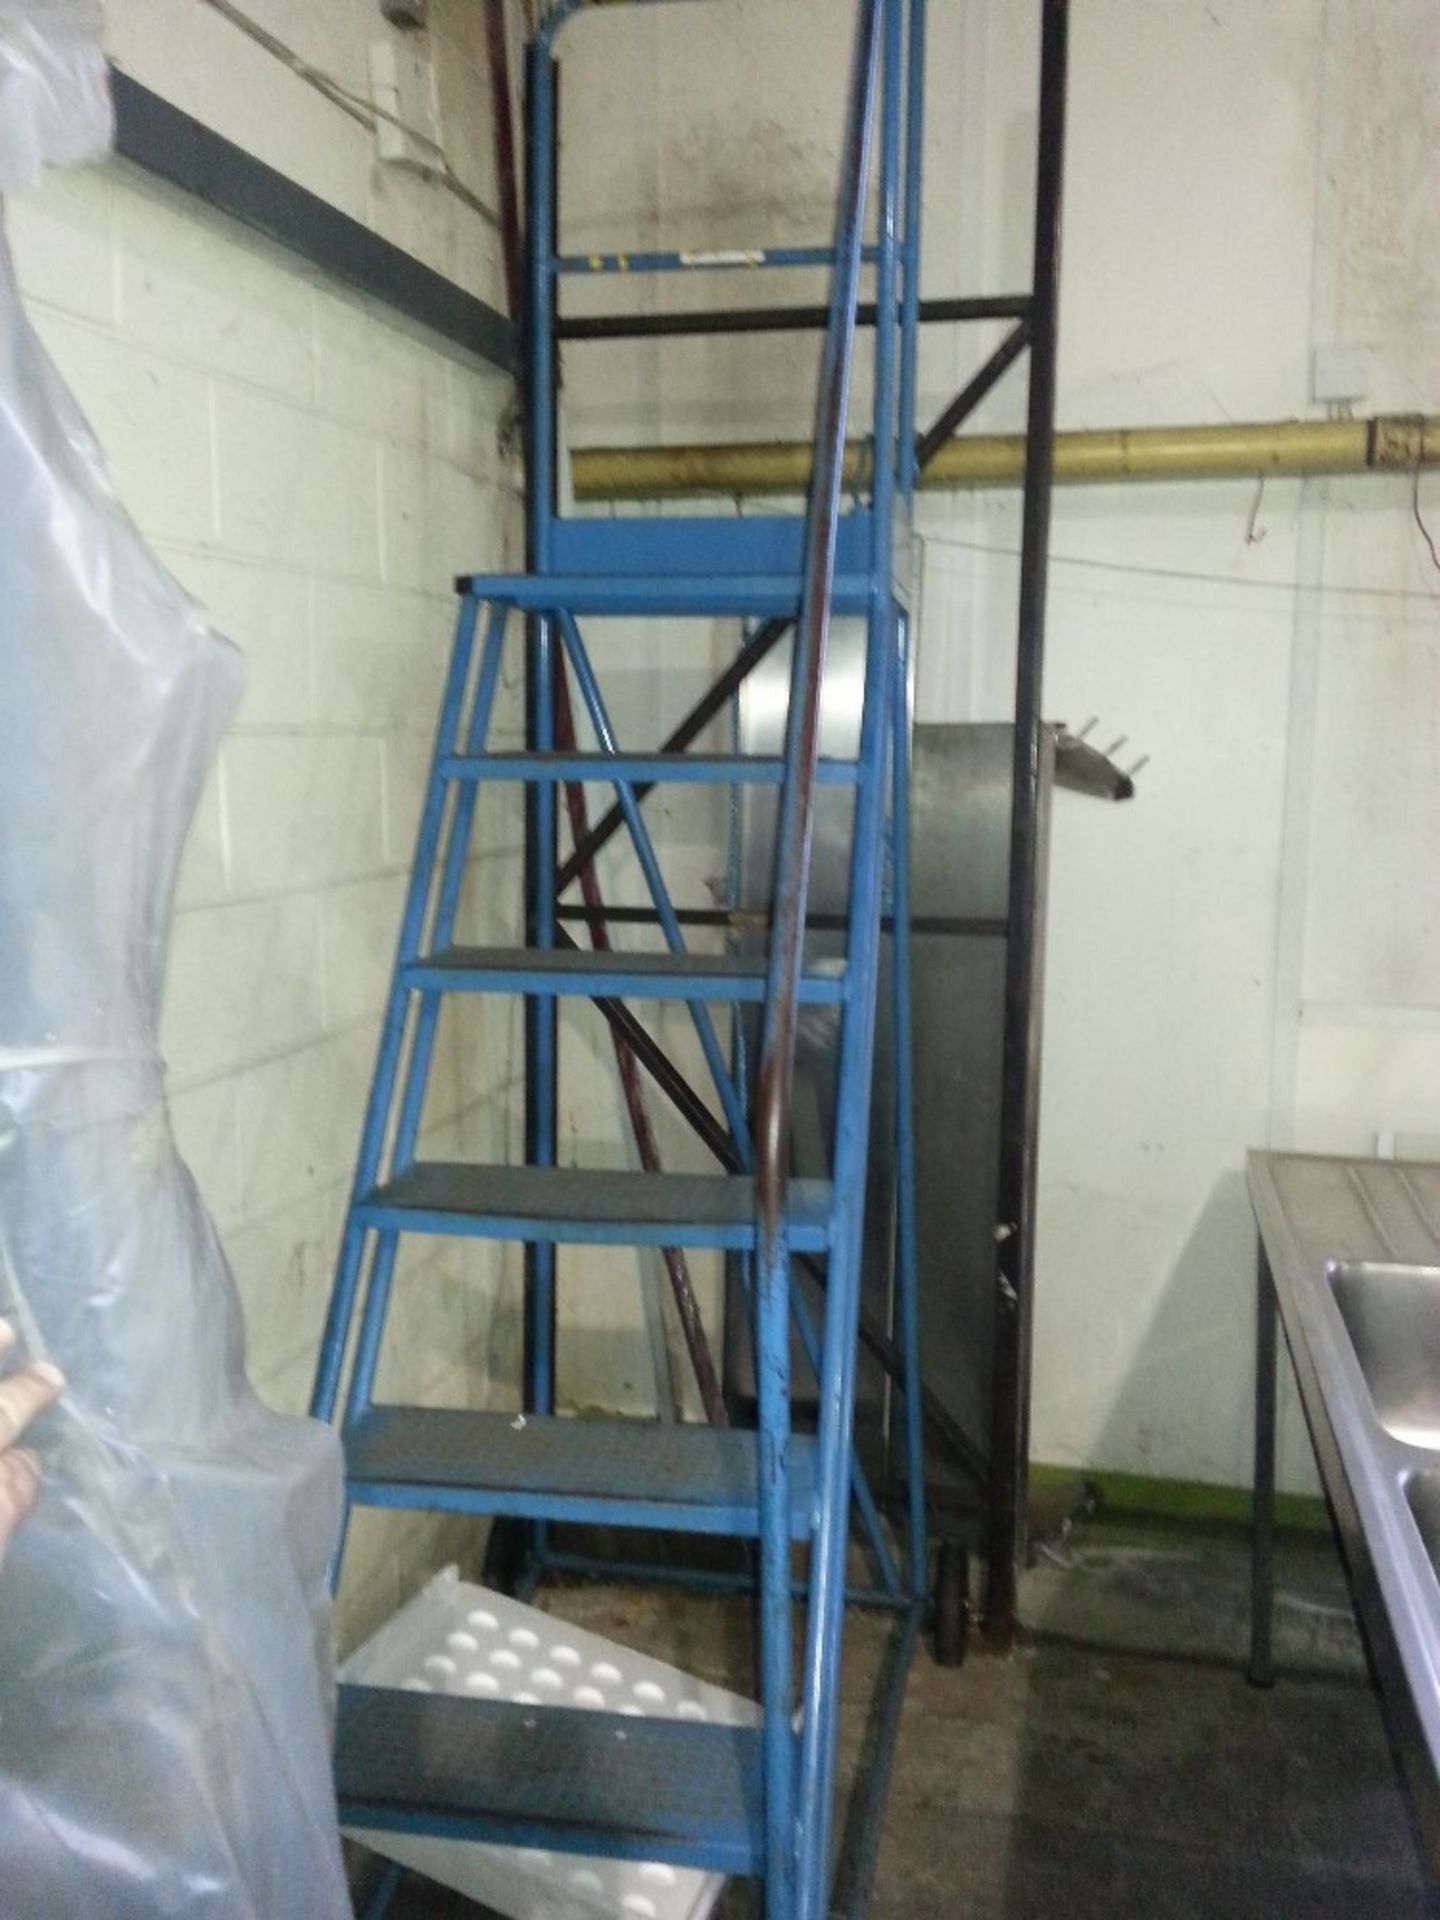 Heavy duty warehouse ladder Located in Gateshead Tyne and Wear collection Friday 24th till Monday